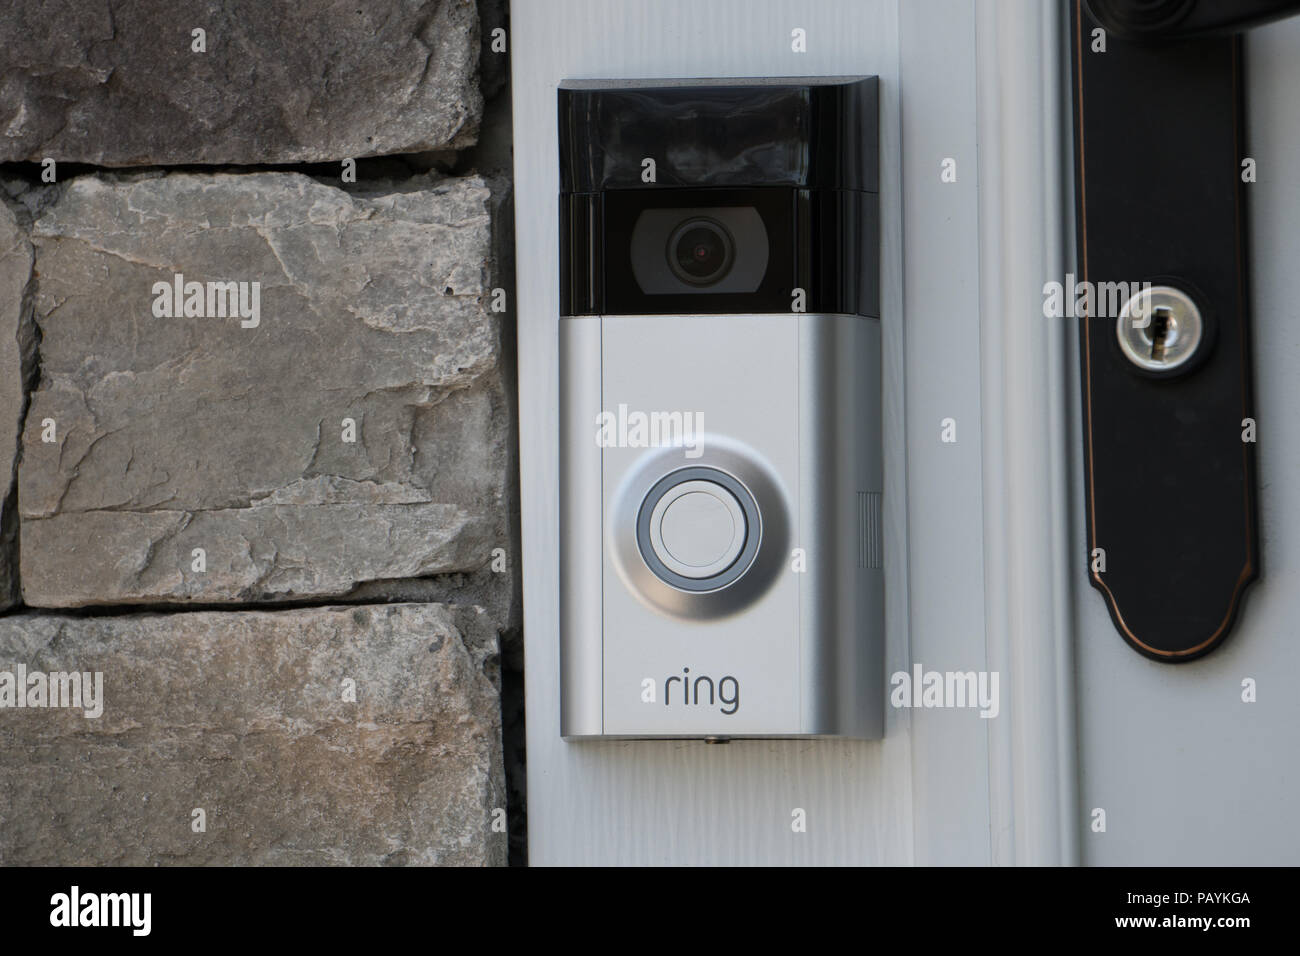 New York, USA - Circa 2018: Ring video doorbell owned by Amazon.  manufactures home smart security products allowing homeowners to monitor  remotely via Stock Photo - Alamy